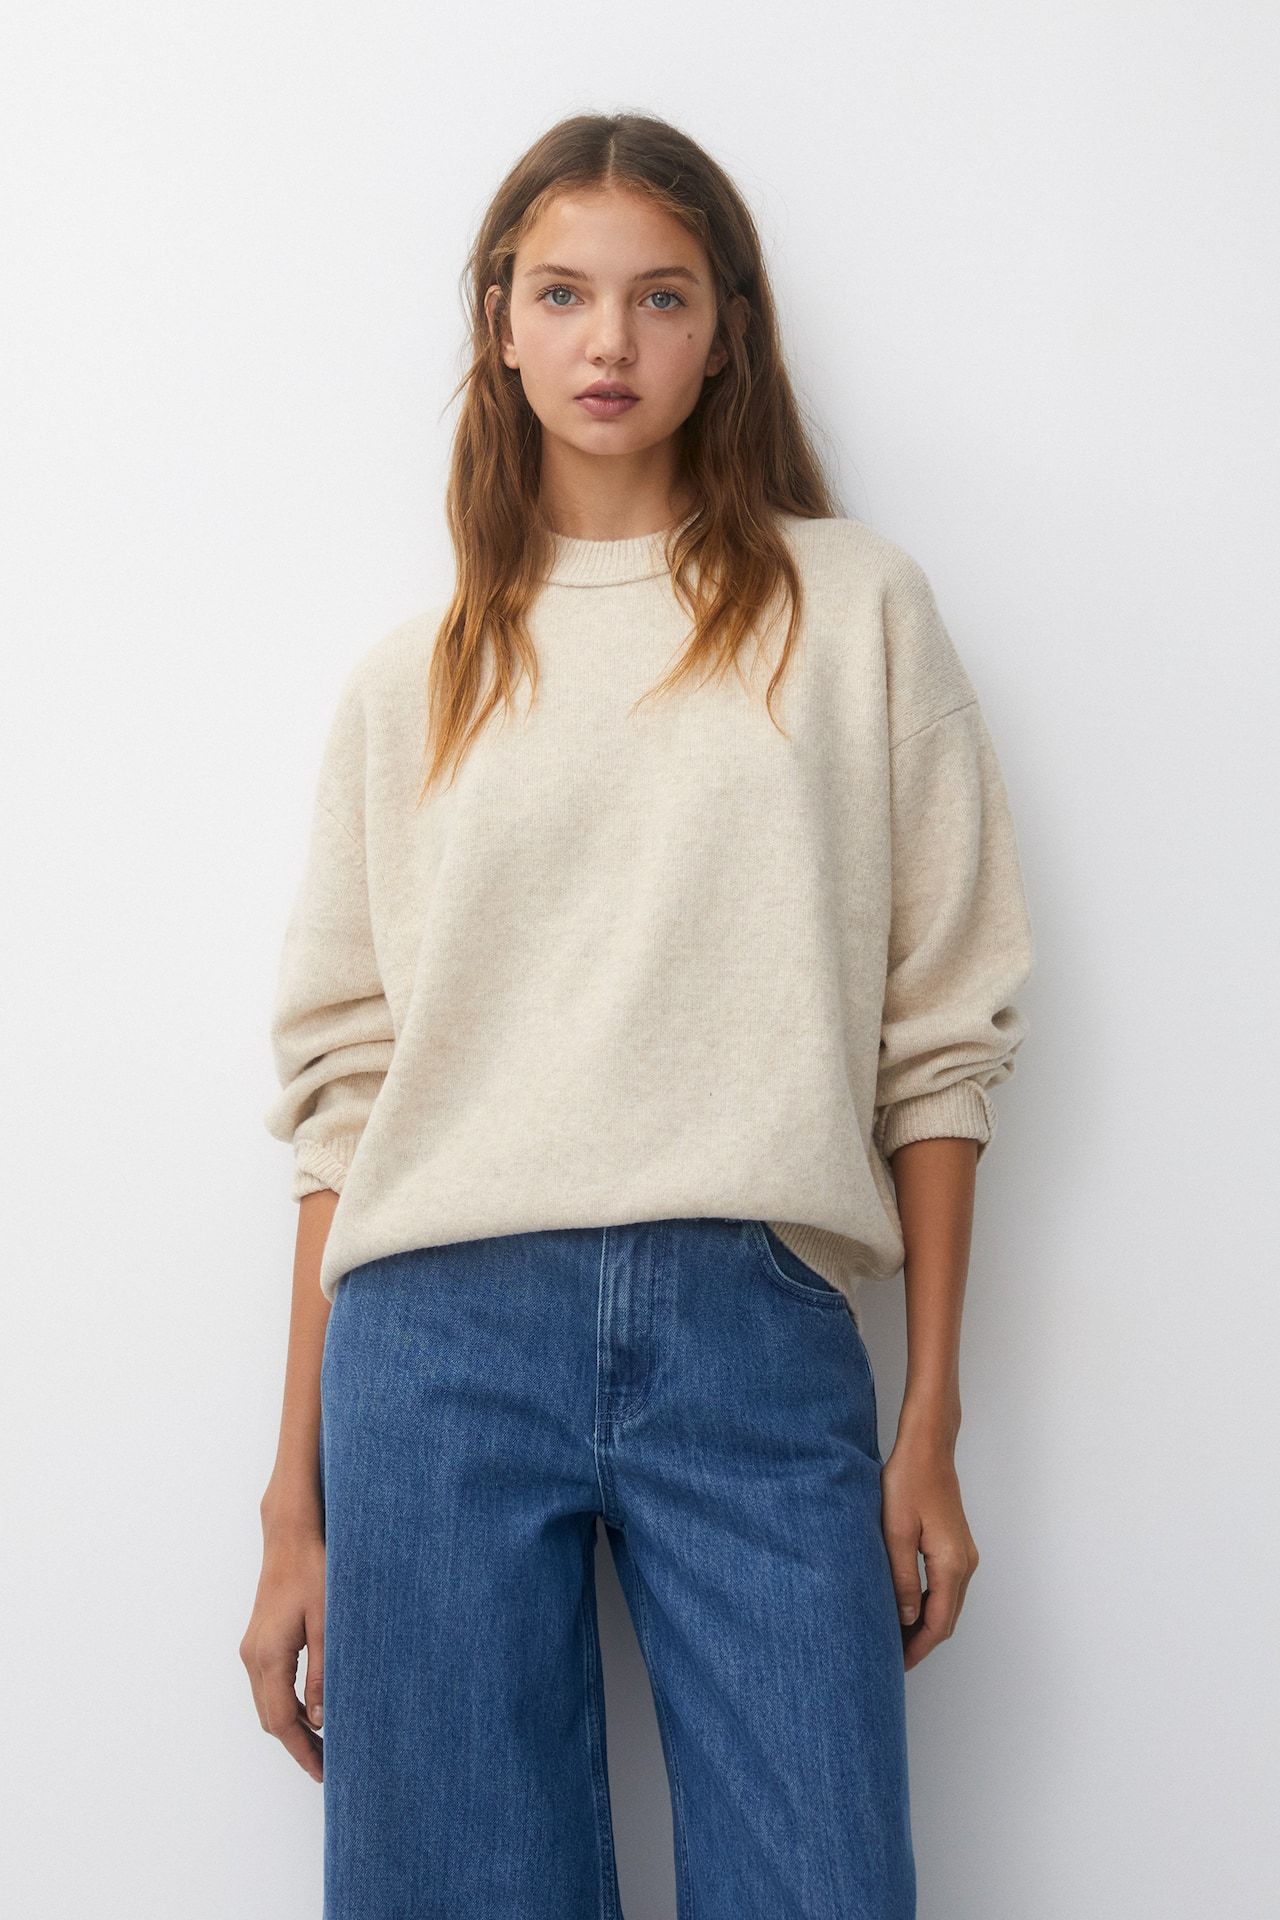 Soft knit jumper | PULL and BEAR UK